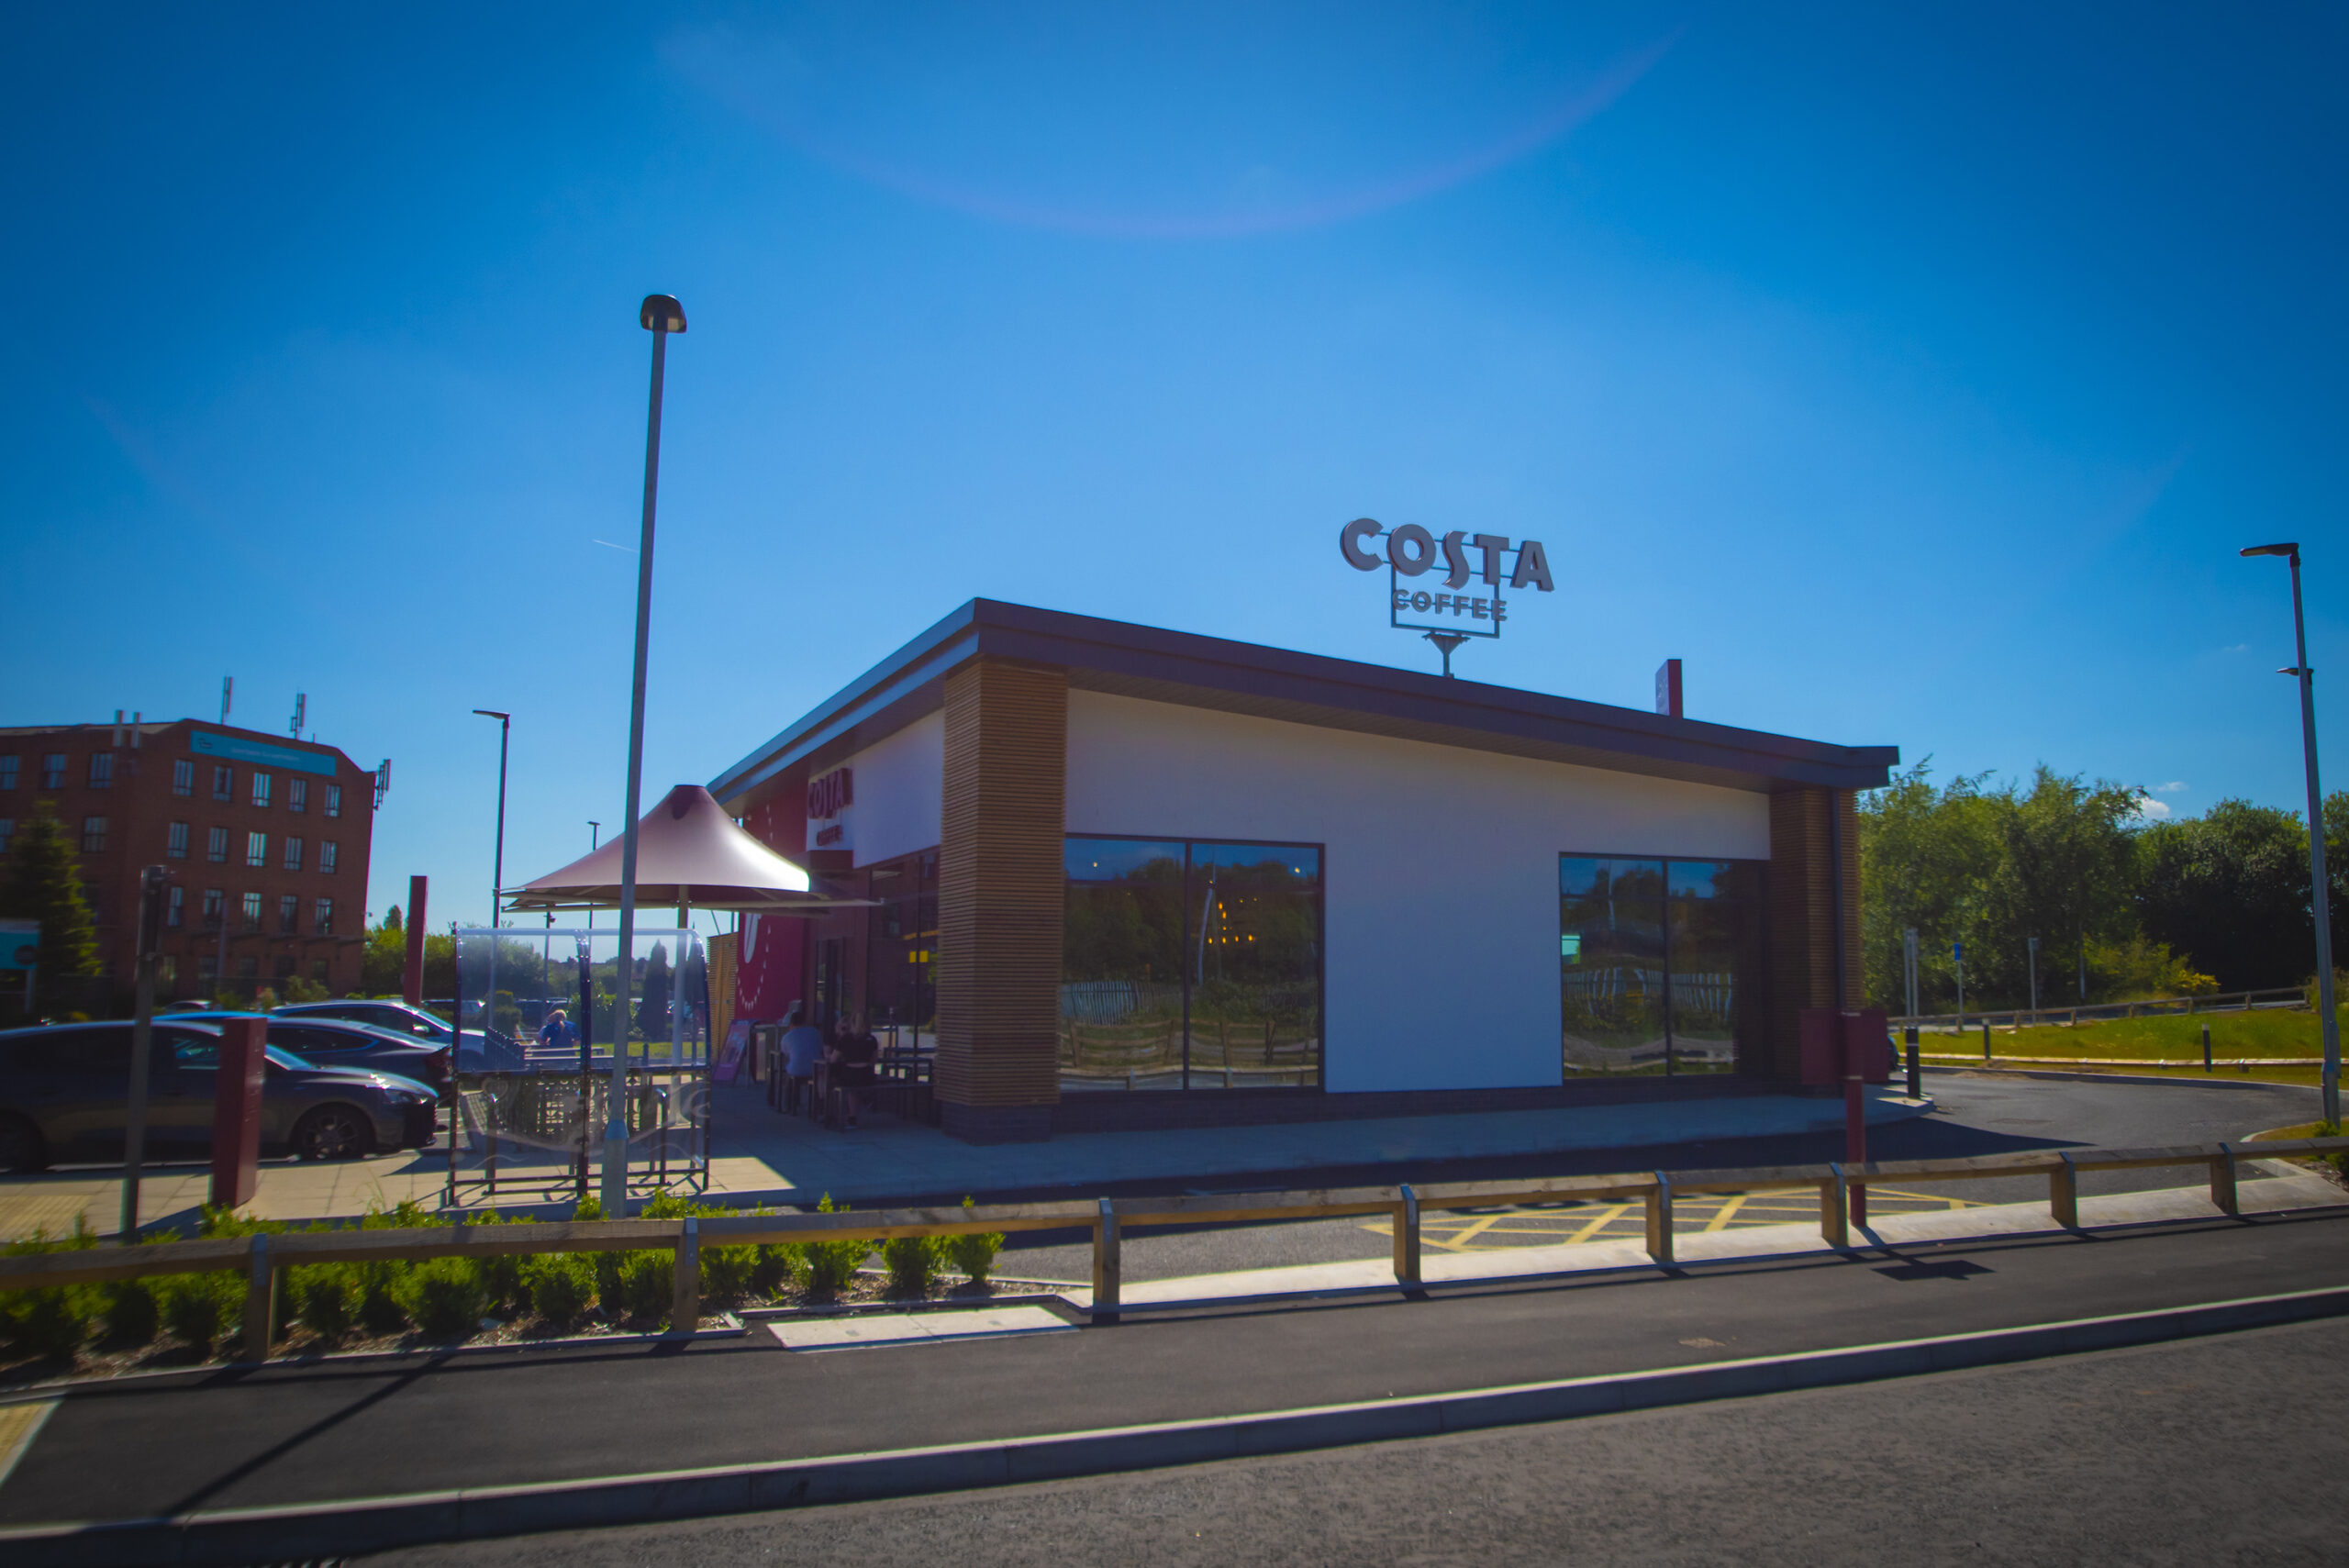 Costa Coffee signage at the front